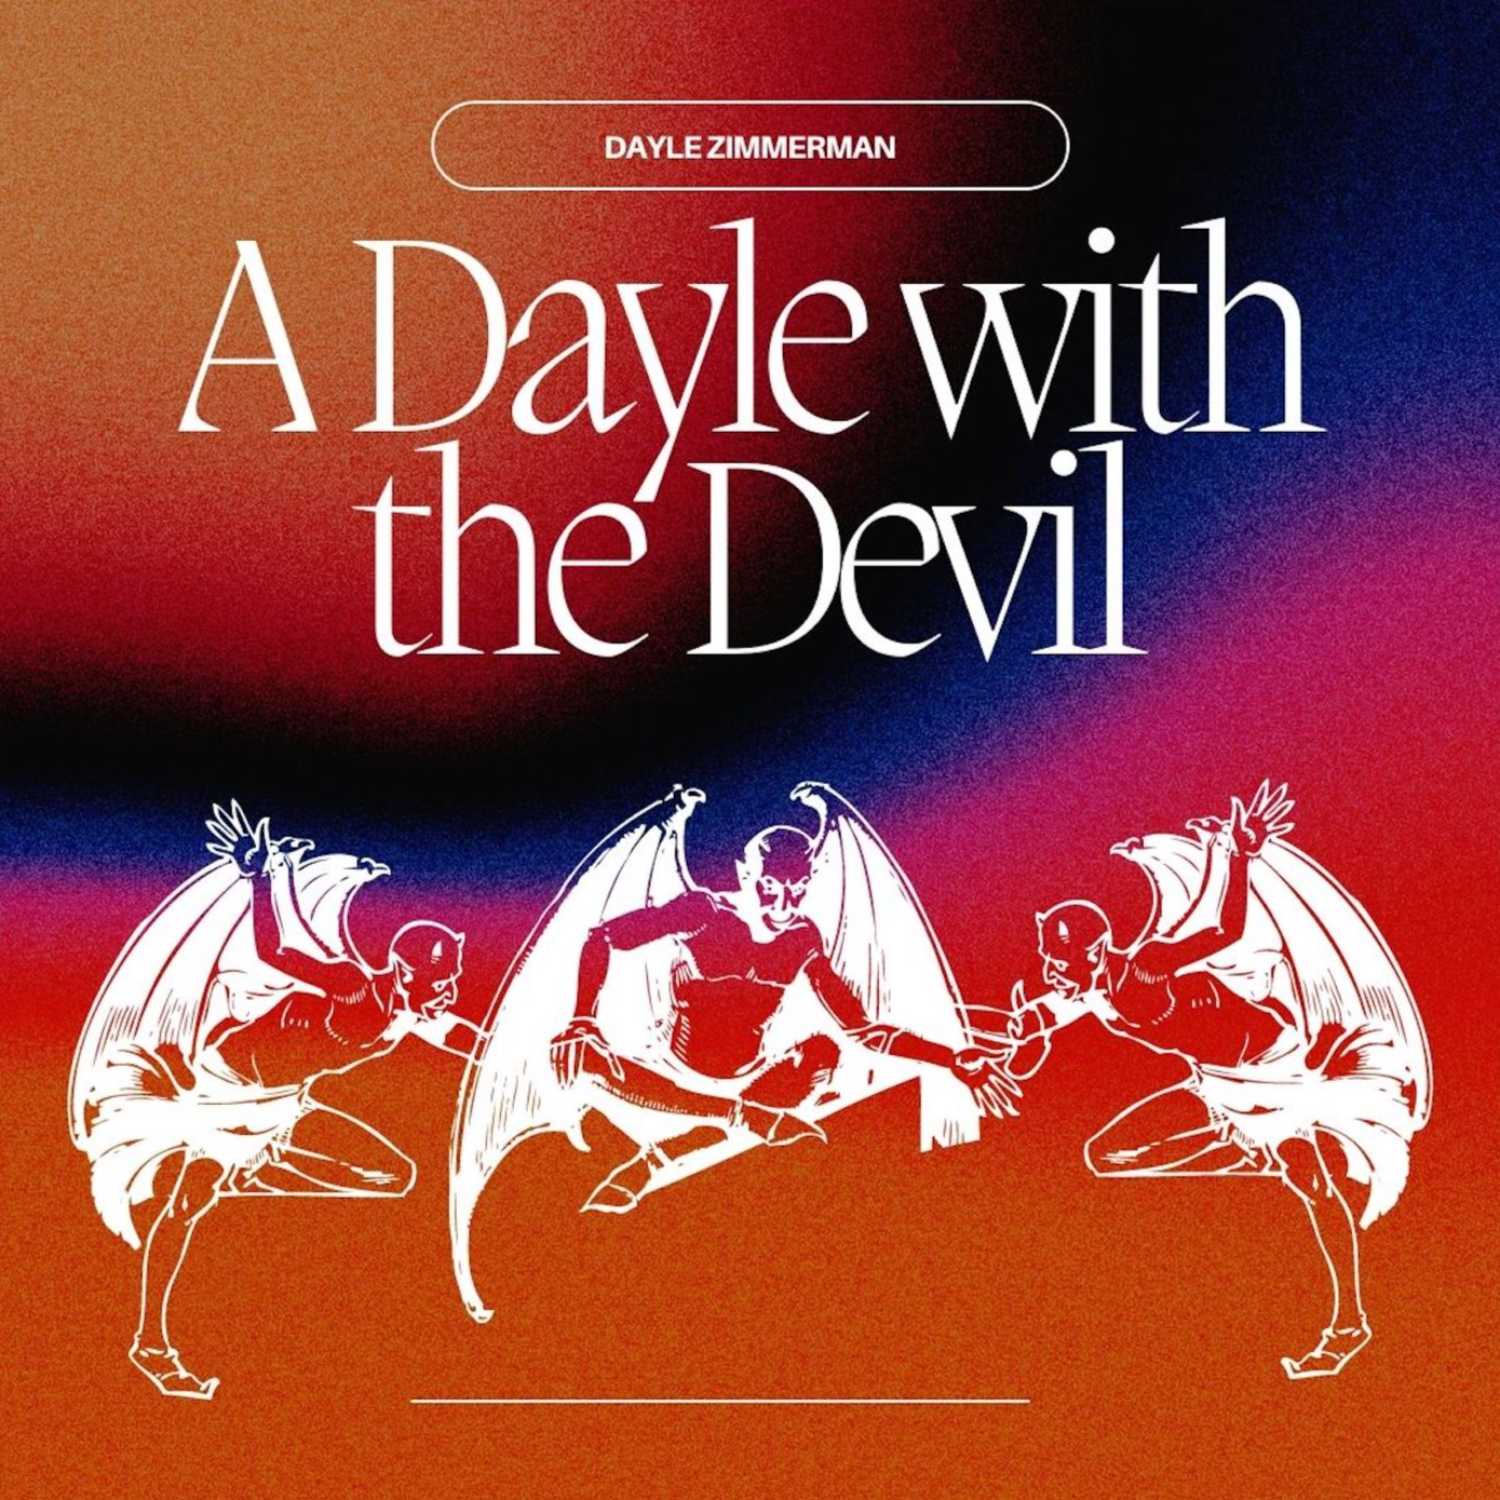 A Dayle with the Devil